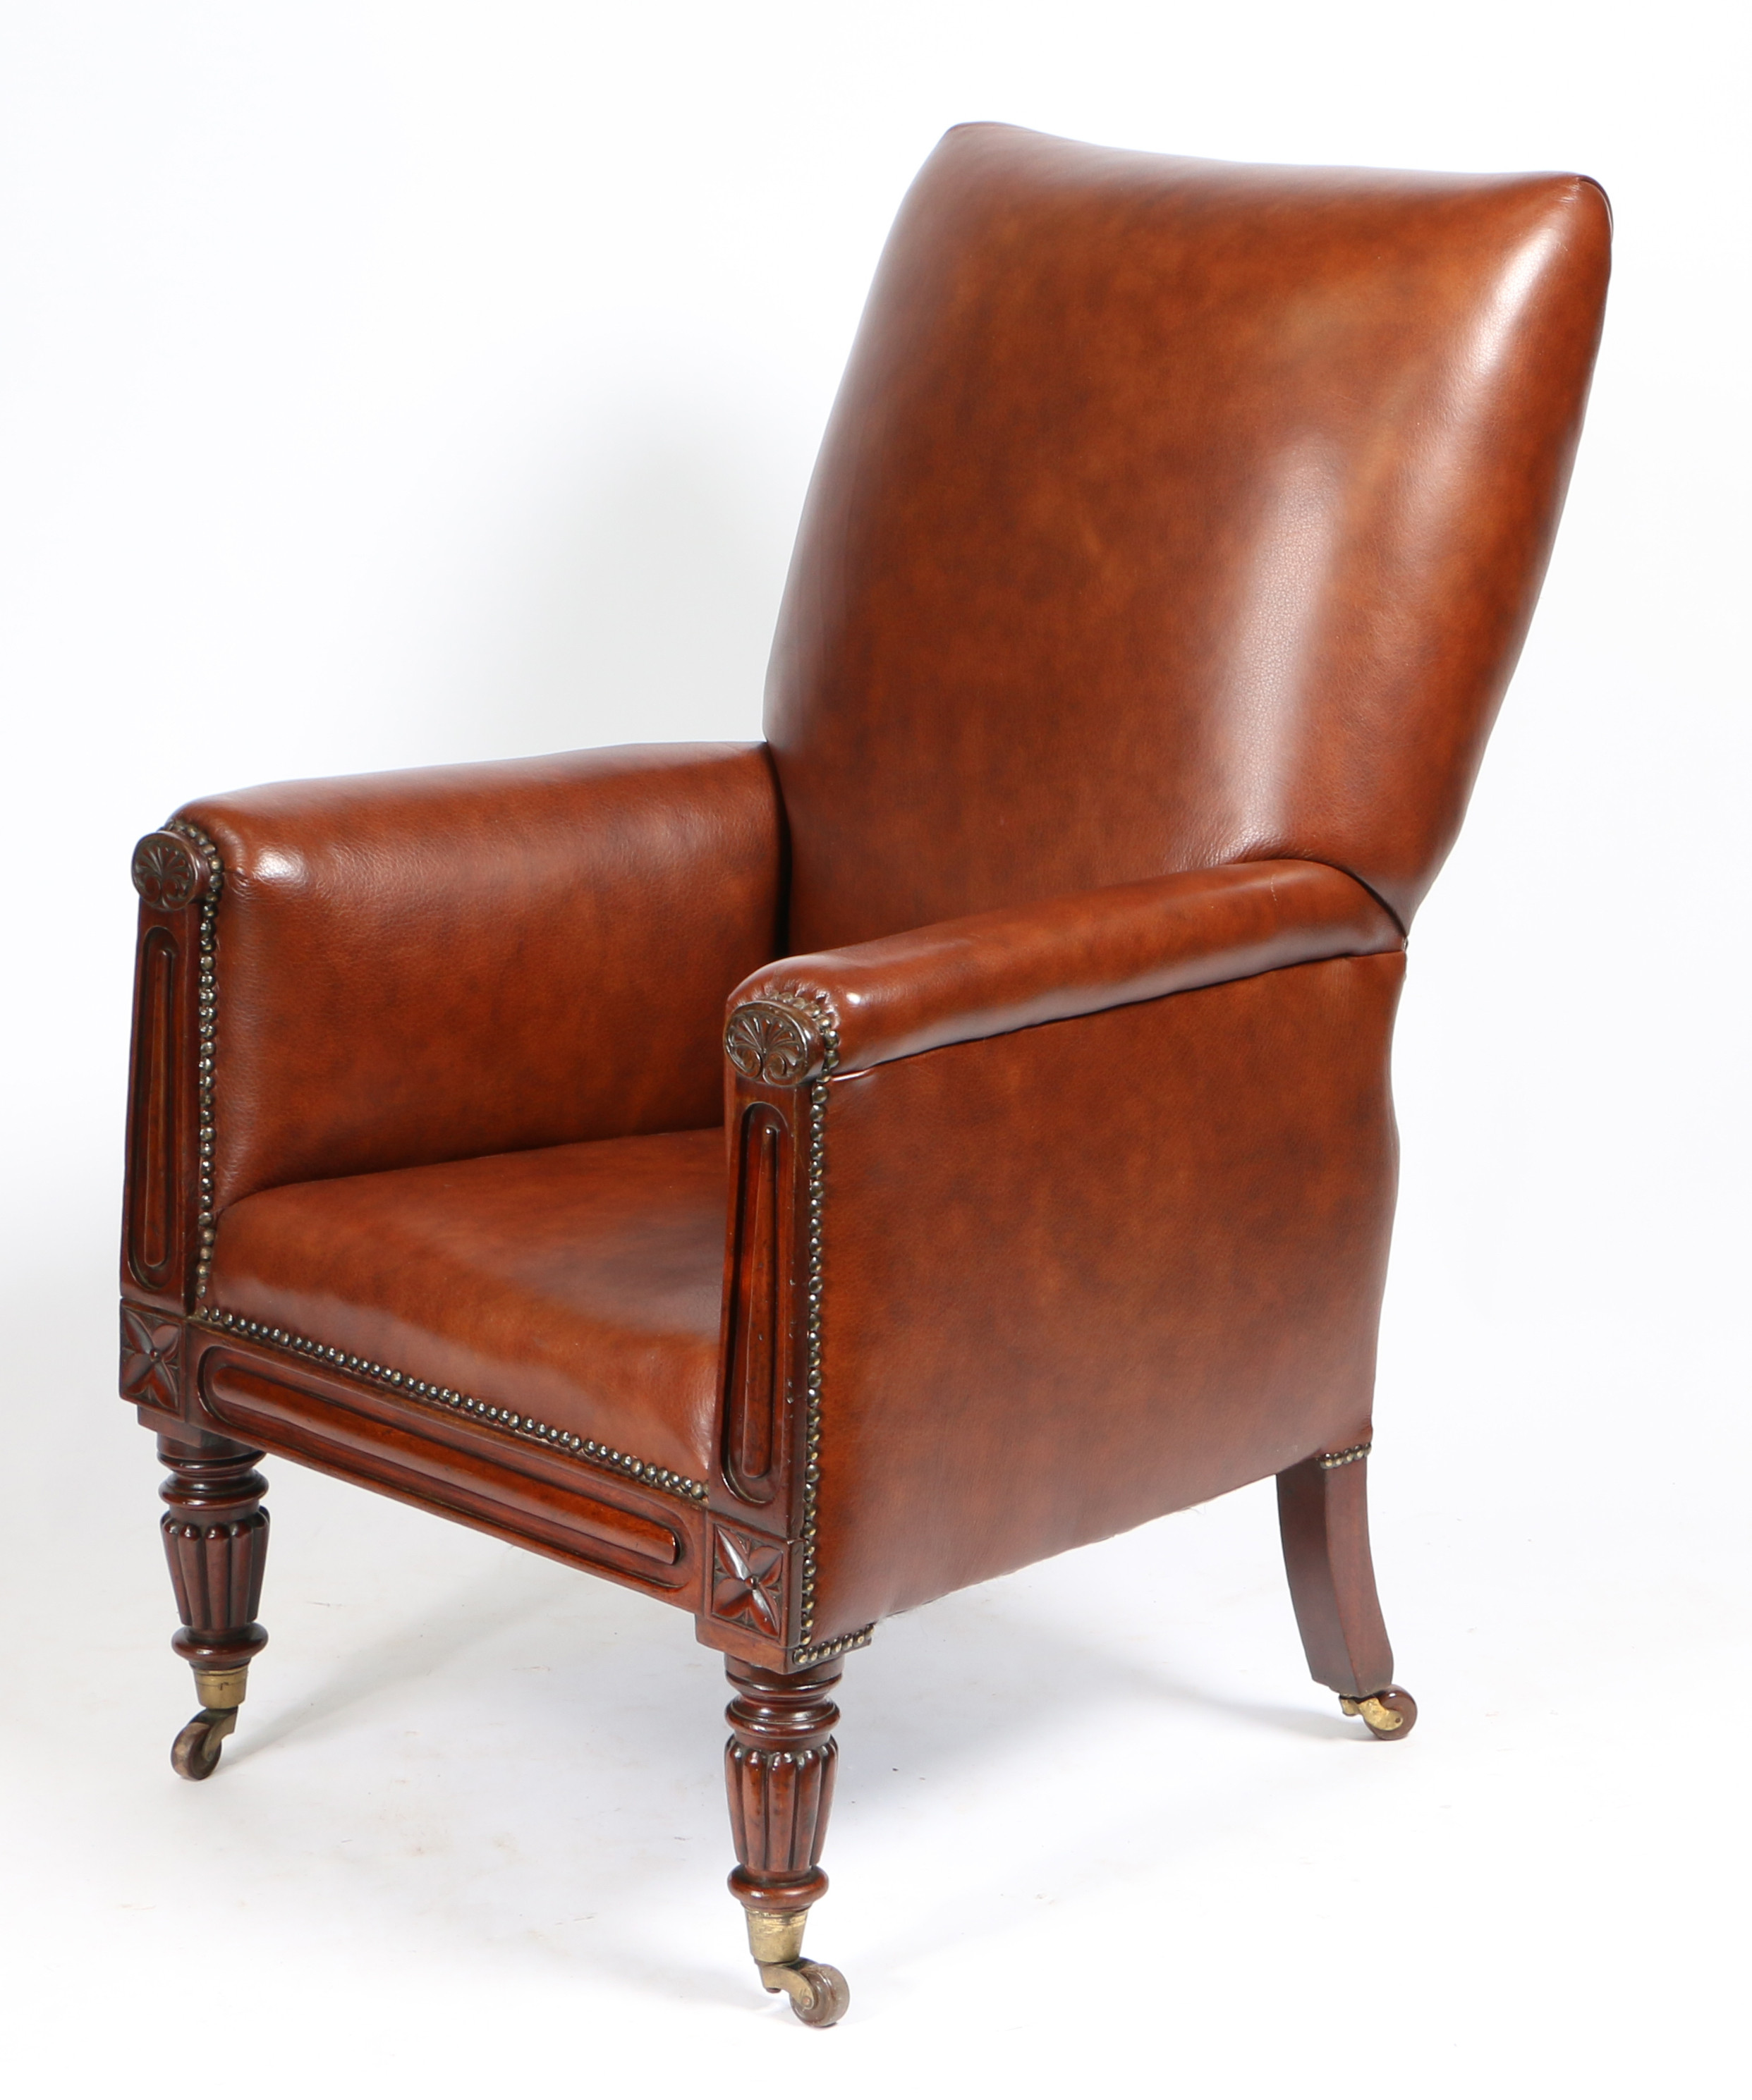 A 19TH CENTURY LEATHER UPHOLSTERED ARMCHAIR.